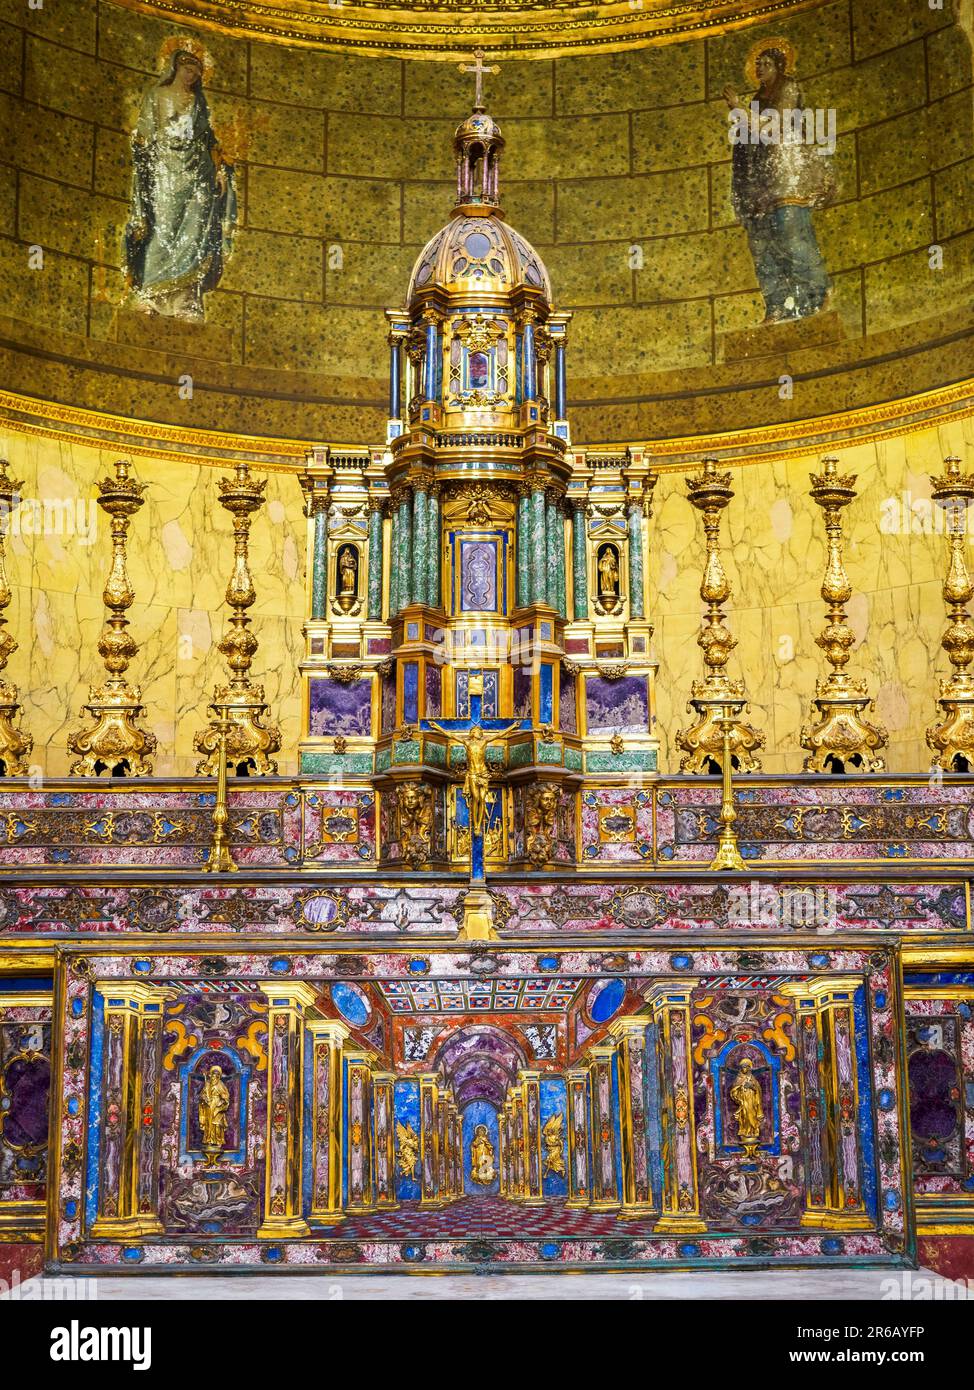 Altar in semi-precious stone and gilt copper work of a Neapolitan baroque artist Dioniso Lazzari (1674) . Royal Chapel, dedicated to Our Lady of Assumption - Royal Palace of Naples that In 1734 became the royal residence of the Bourbons - Naples, Italy Stock Photo